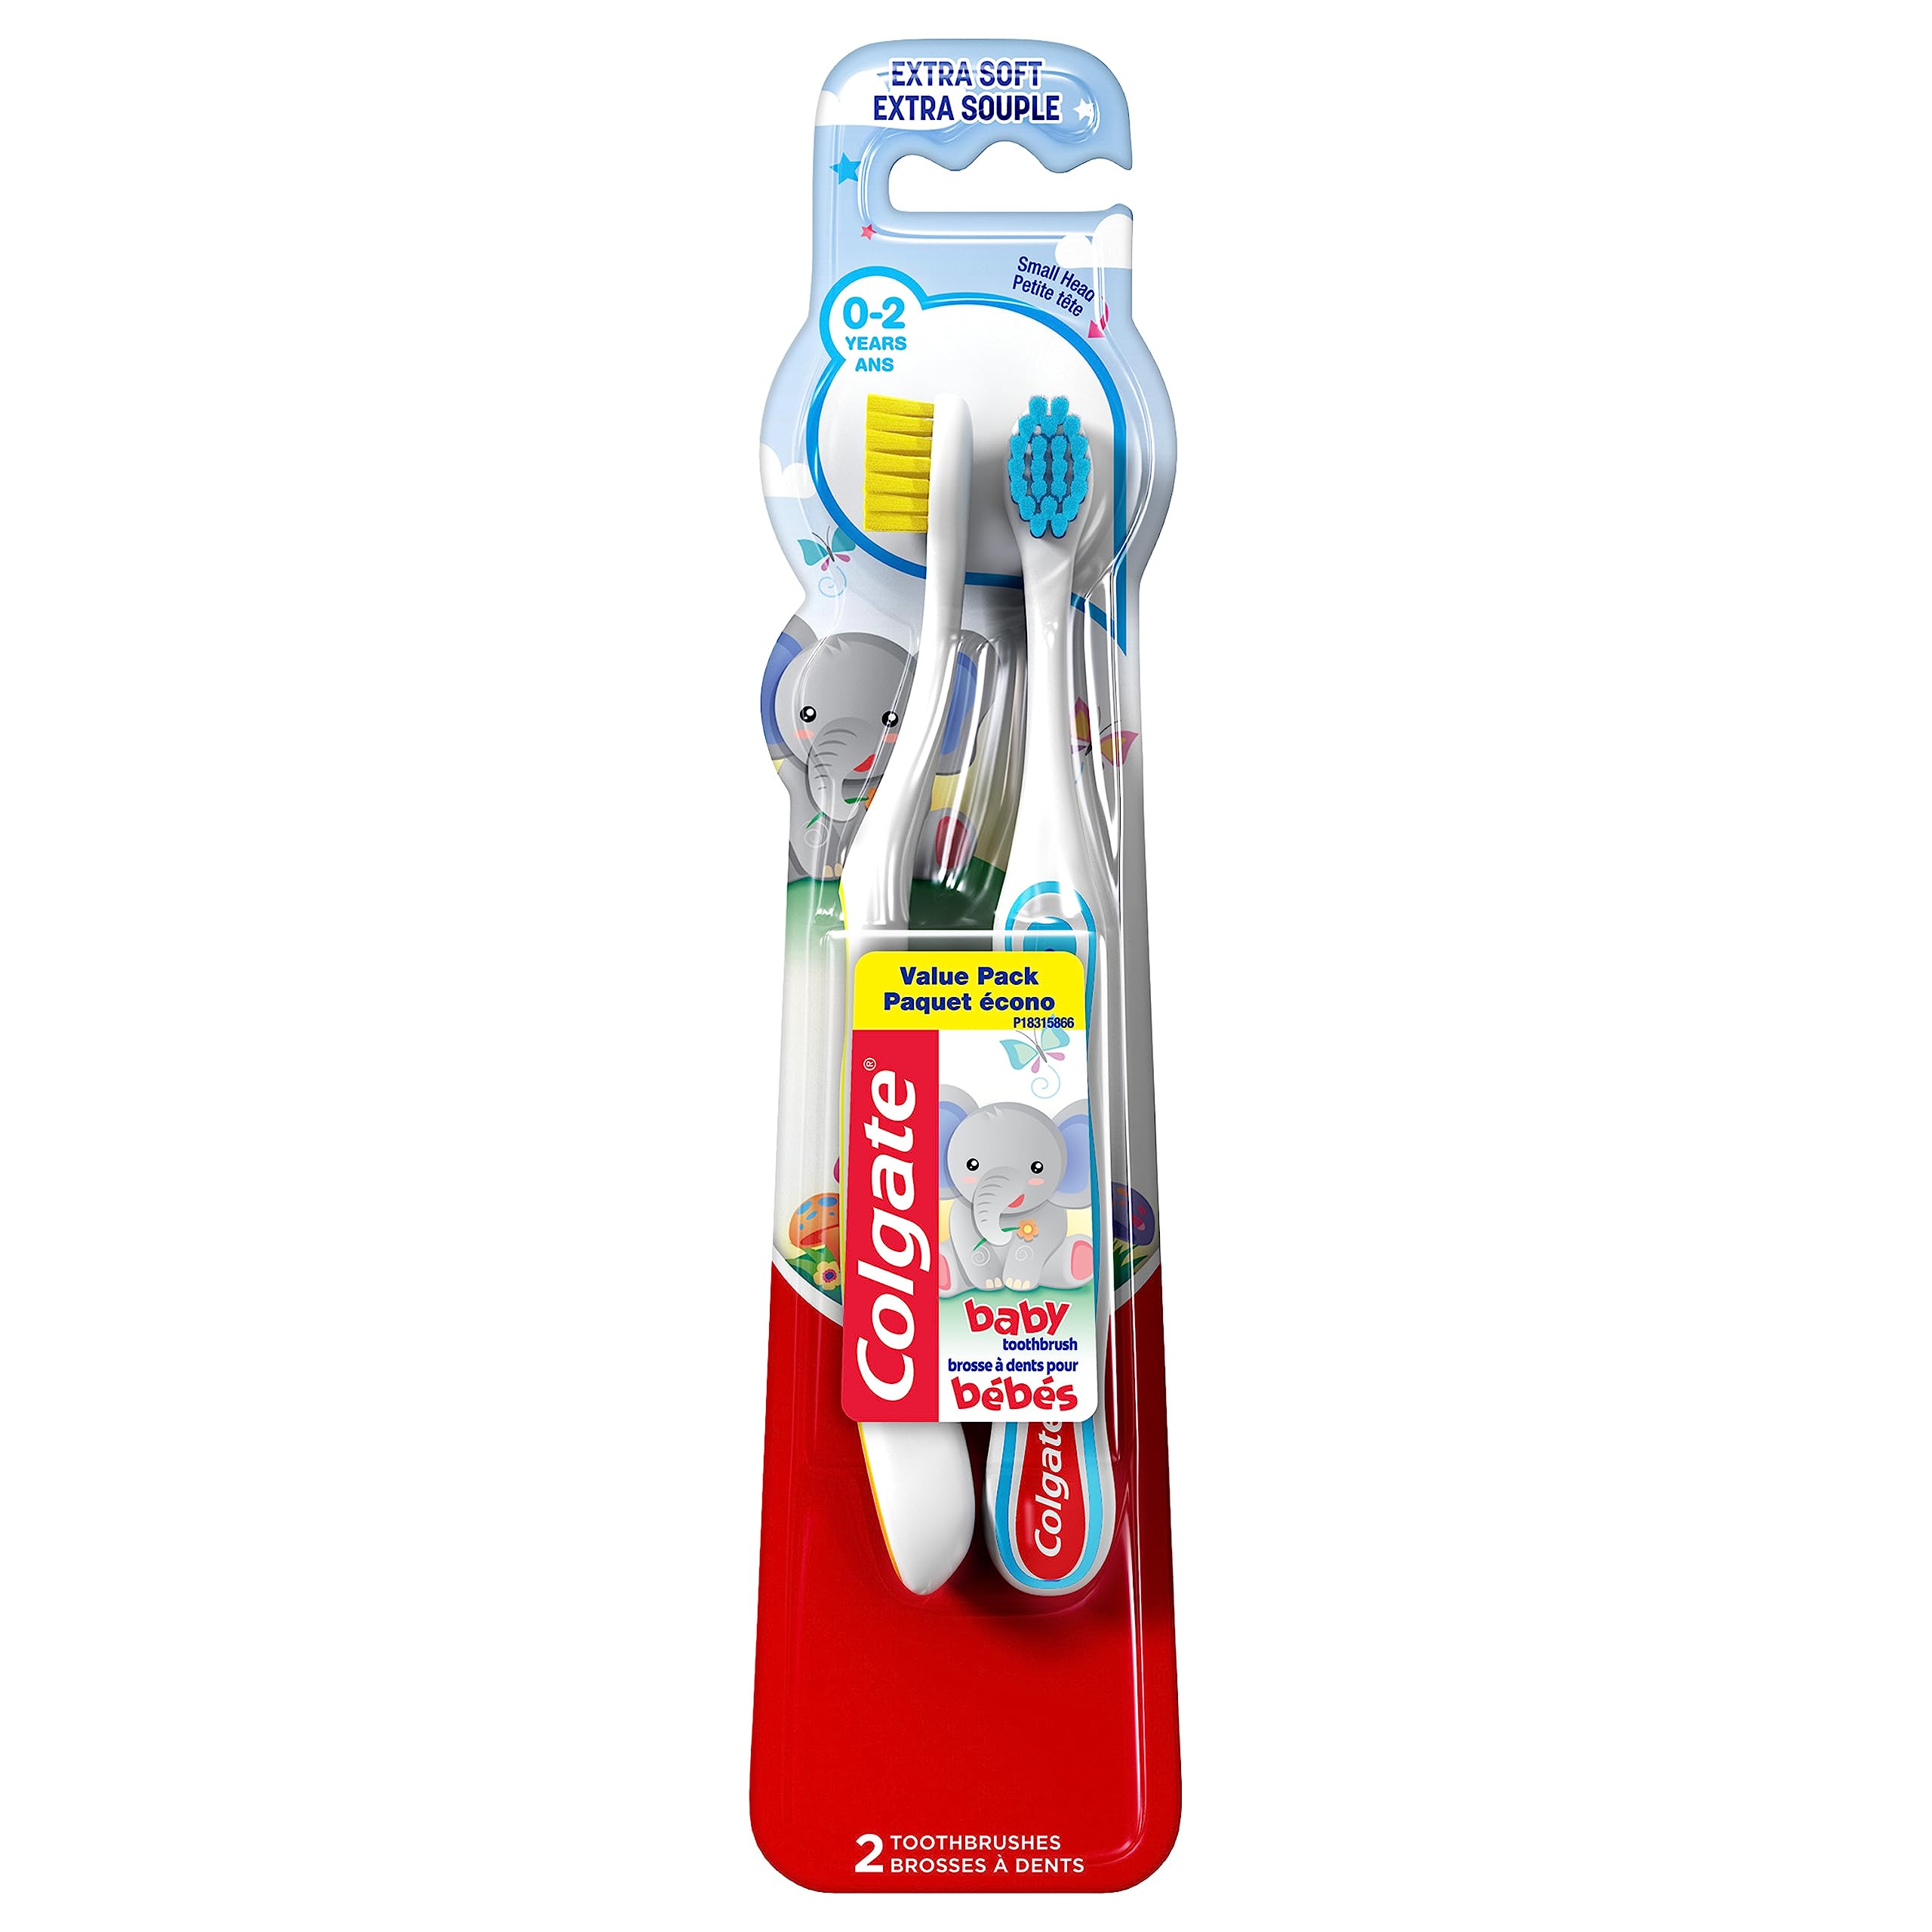 Colgate Kids My First Toothbrush, Extra Soft Baby Toothbrushes, 2 Pack